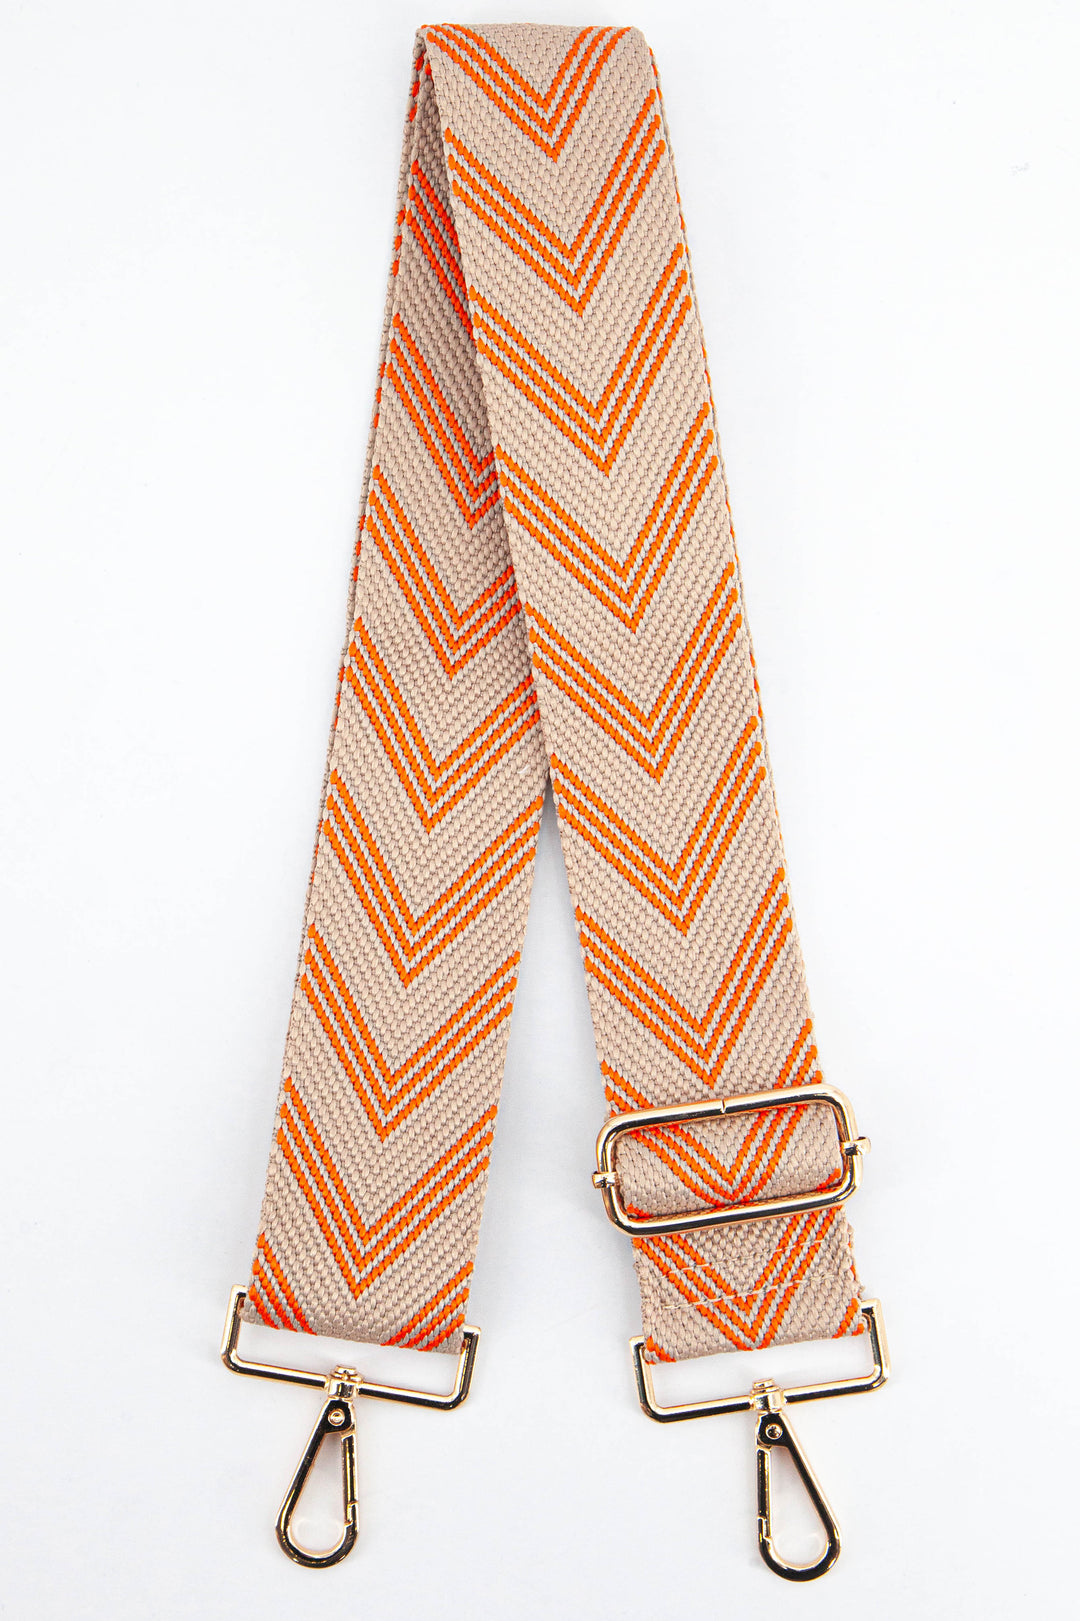 orange and beige woven chevron pattern adjustable bag strap with gold snap hook attachments